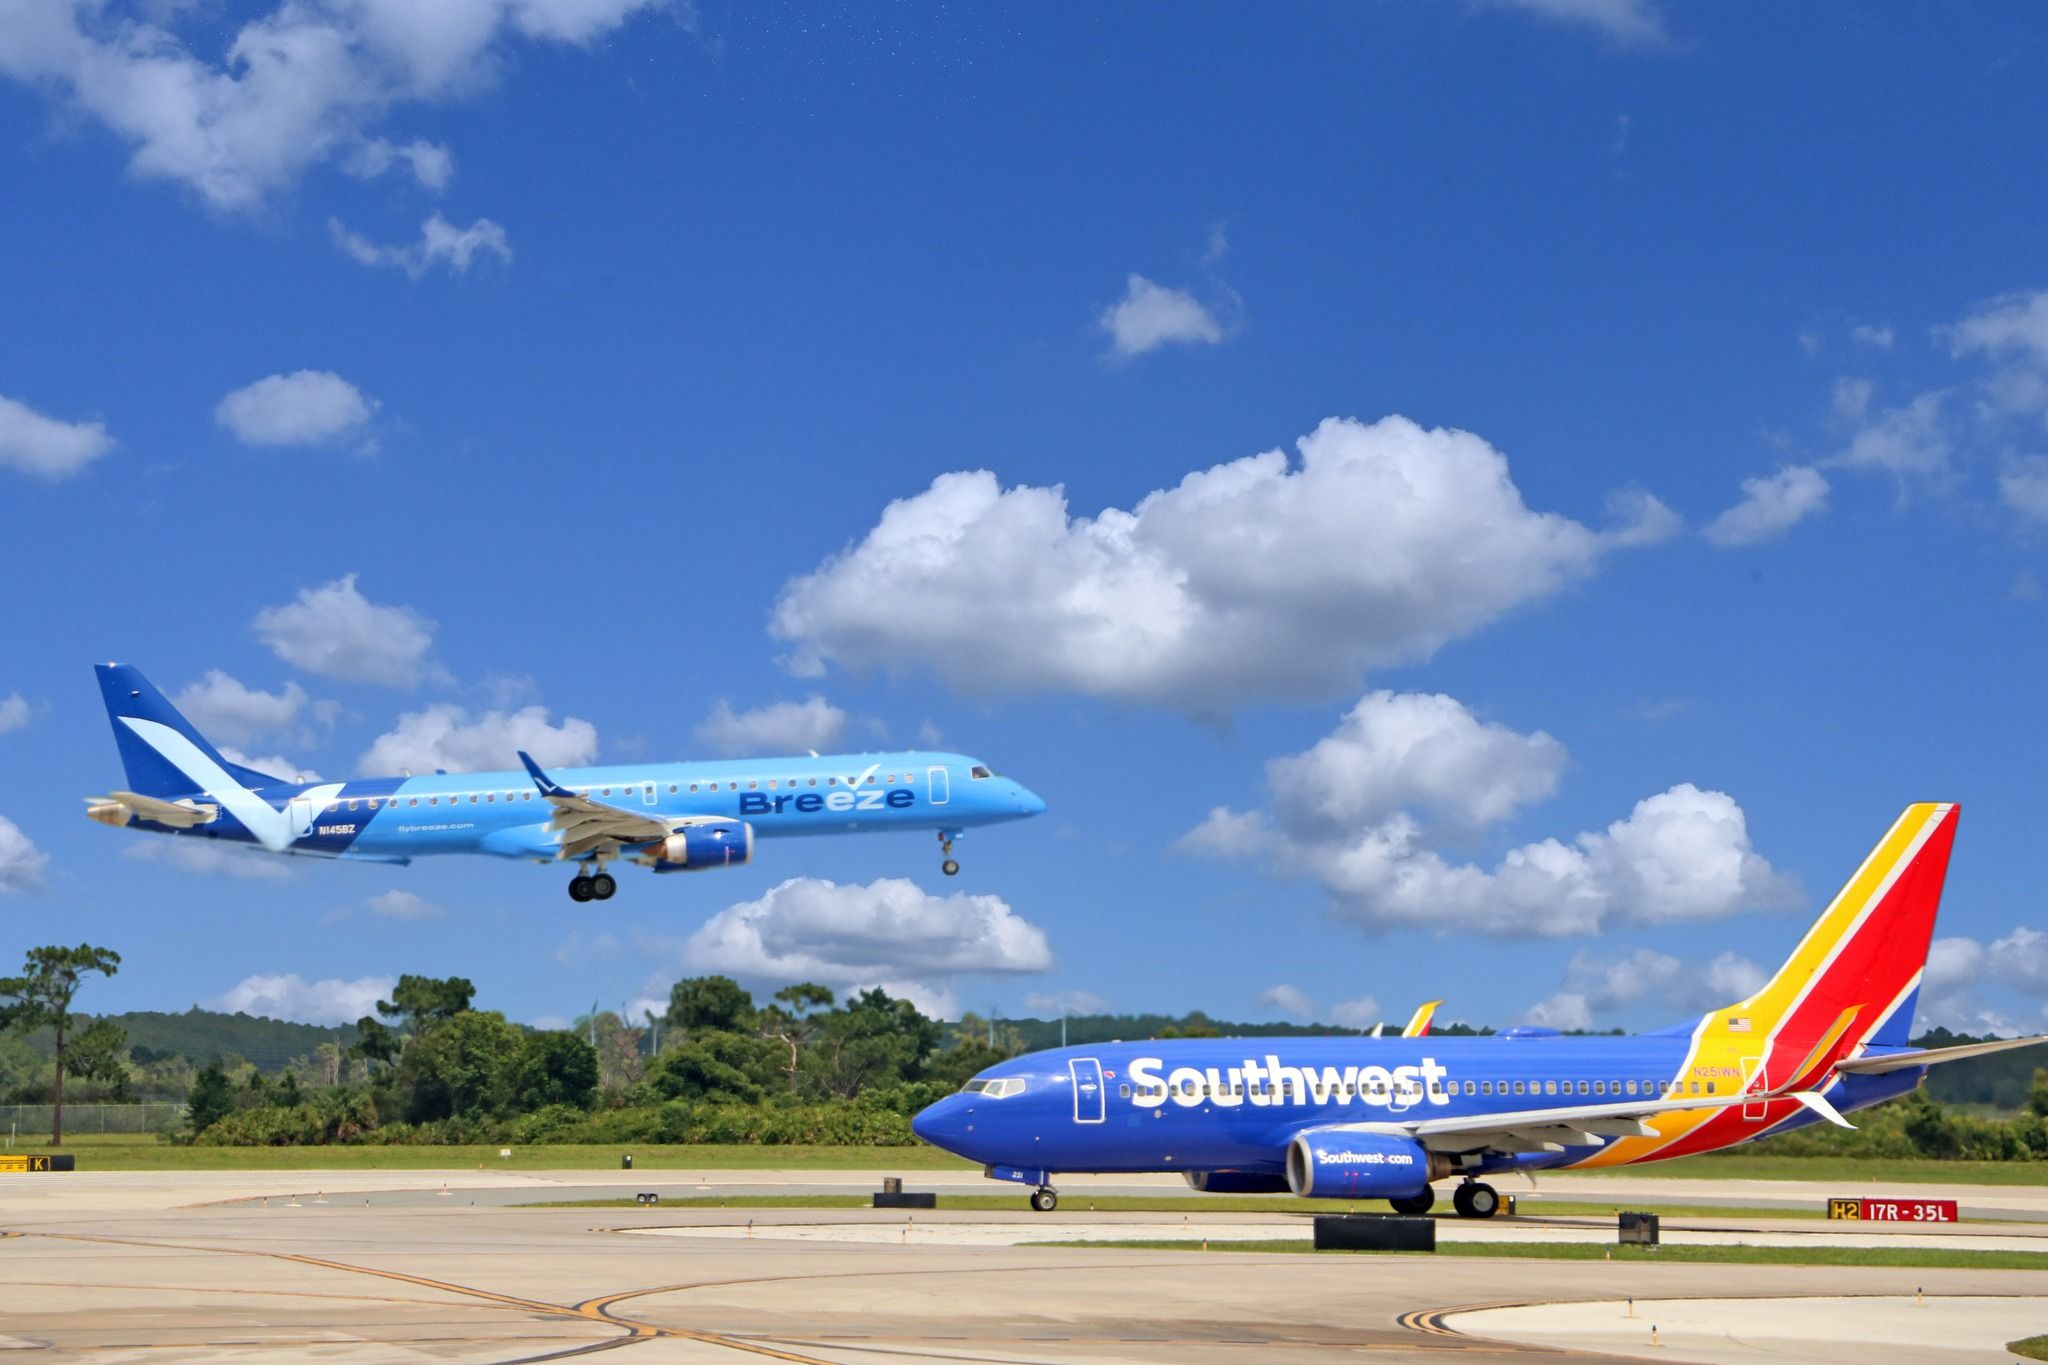 Breeze Airways Embraer E190 and Southwest Airlines Boeing 737-7H4 at Orlando International Airport.